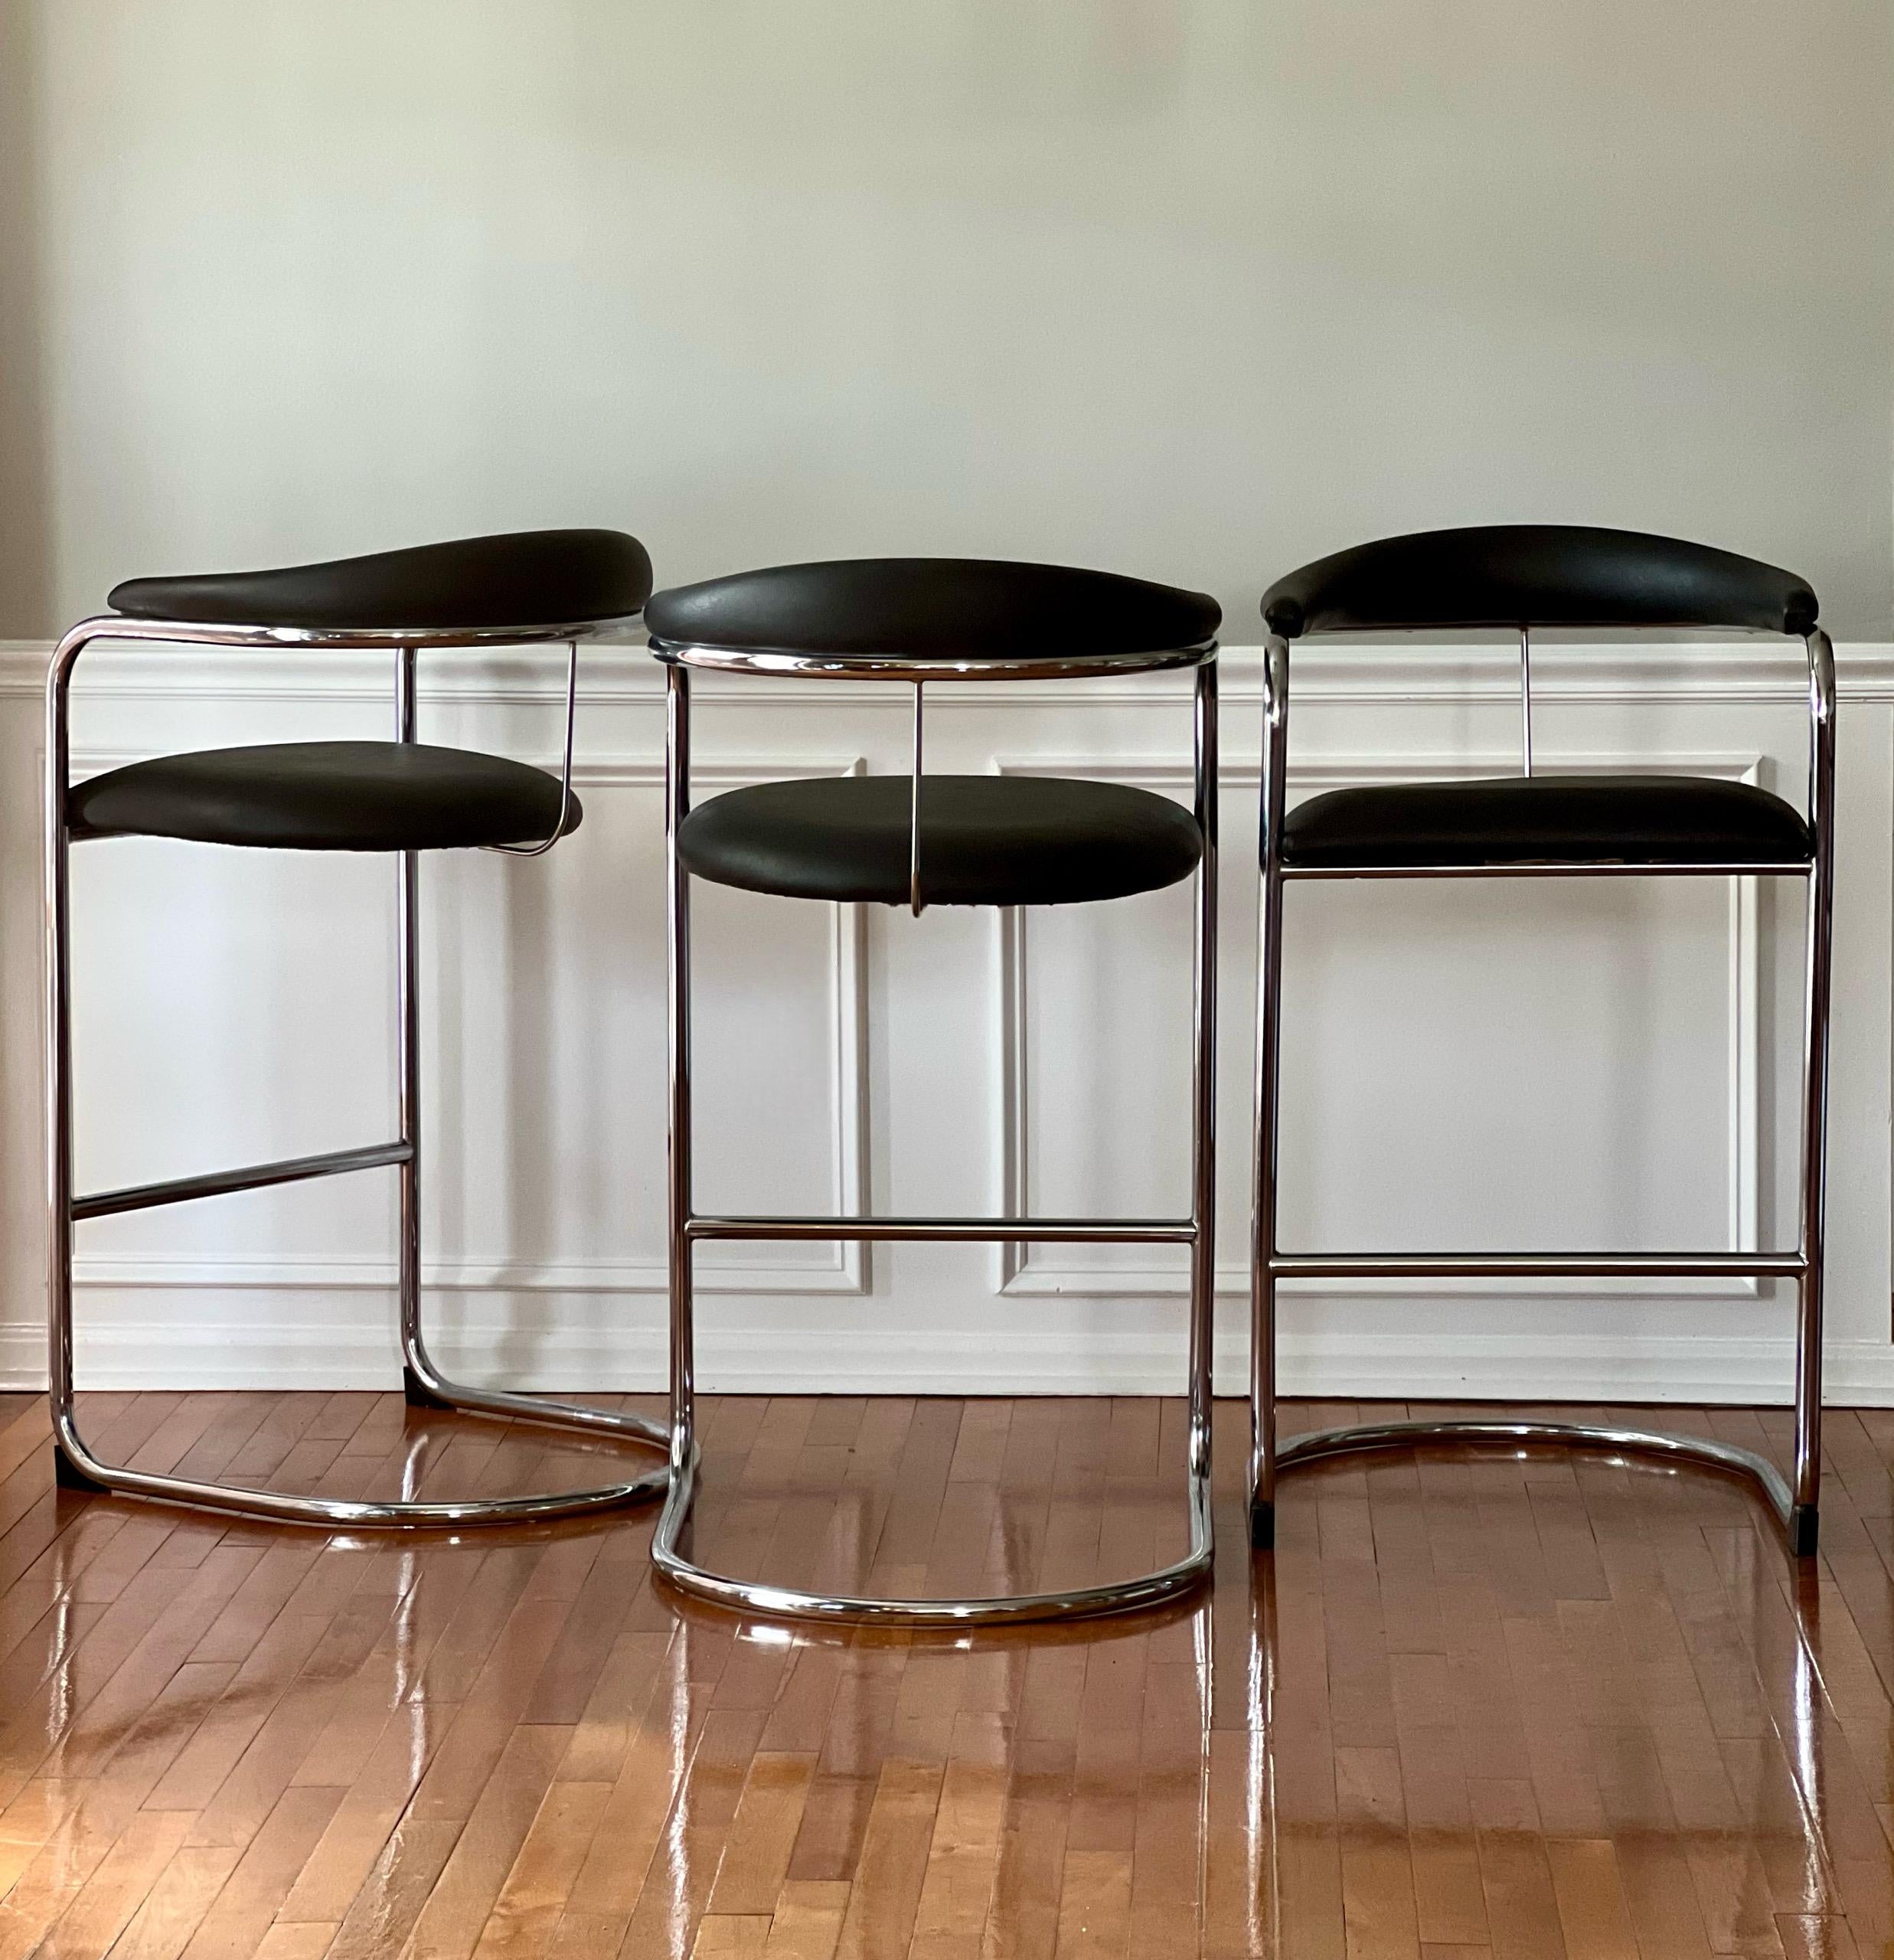 1980's Anton Lorenz for Thonet Black and Chrome Cantilever Bar Stools, Set of 3 For Sale 1